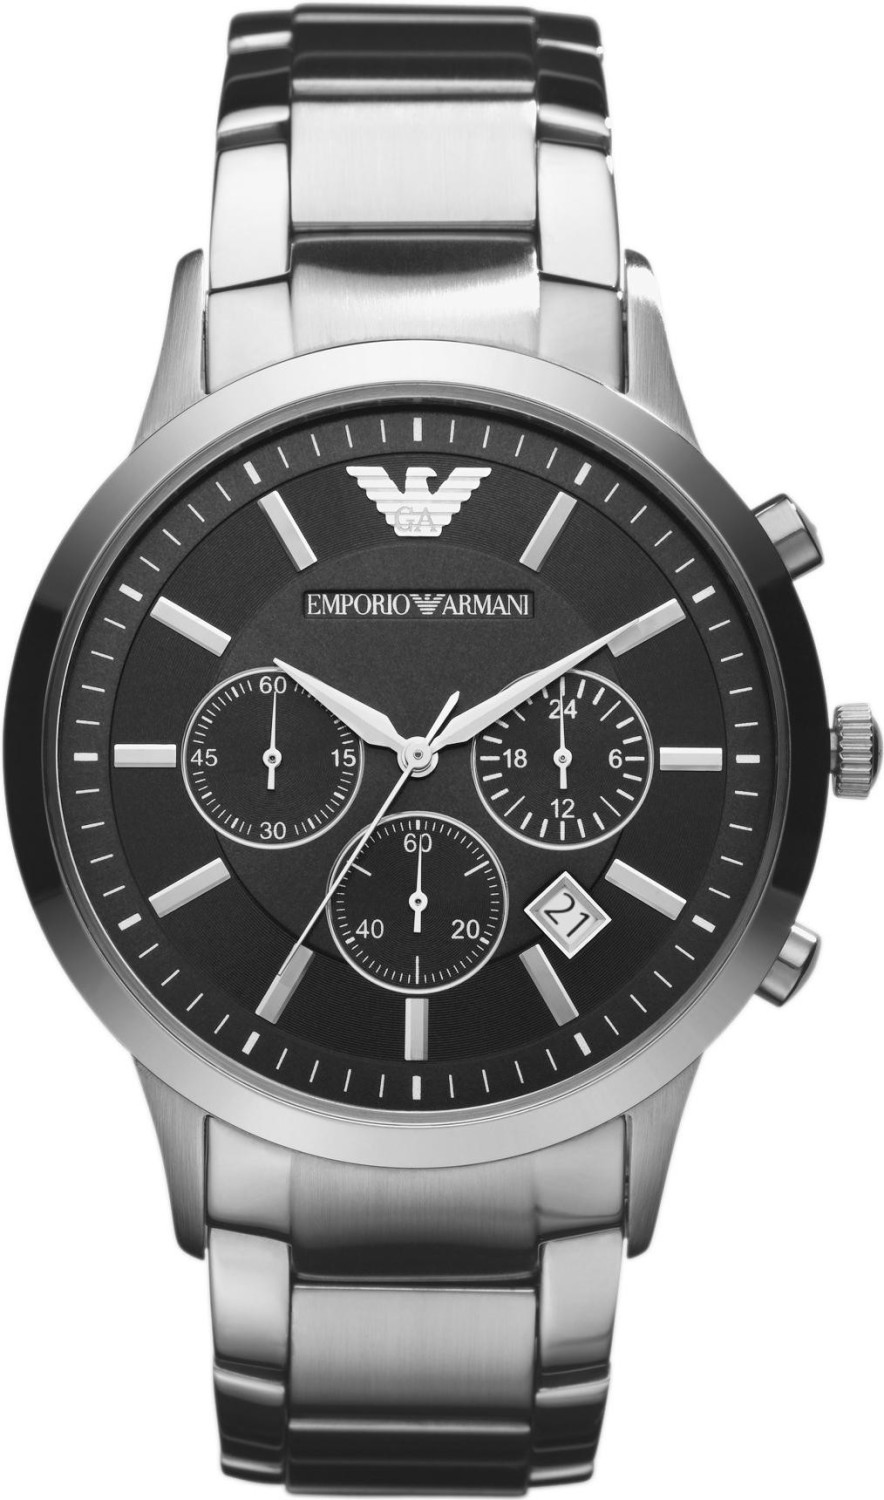 Buy Emporio Armani Renato Chronograph £59.68 (Today) – on from Deals AR2434 Best